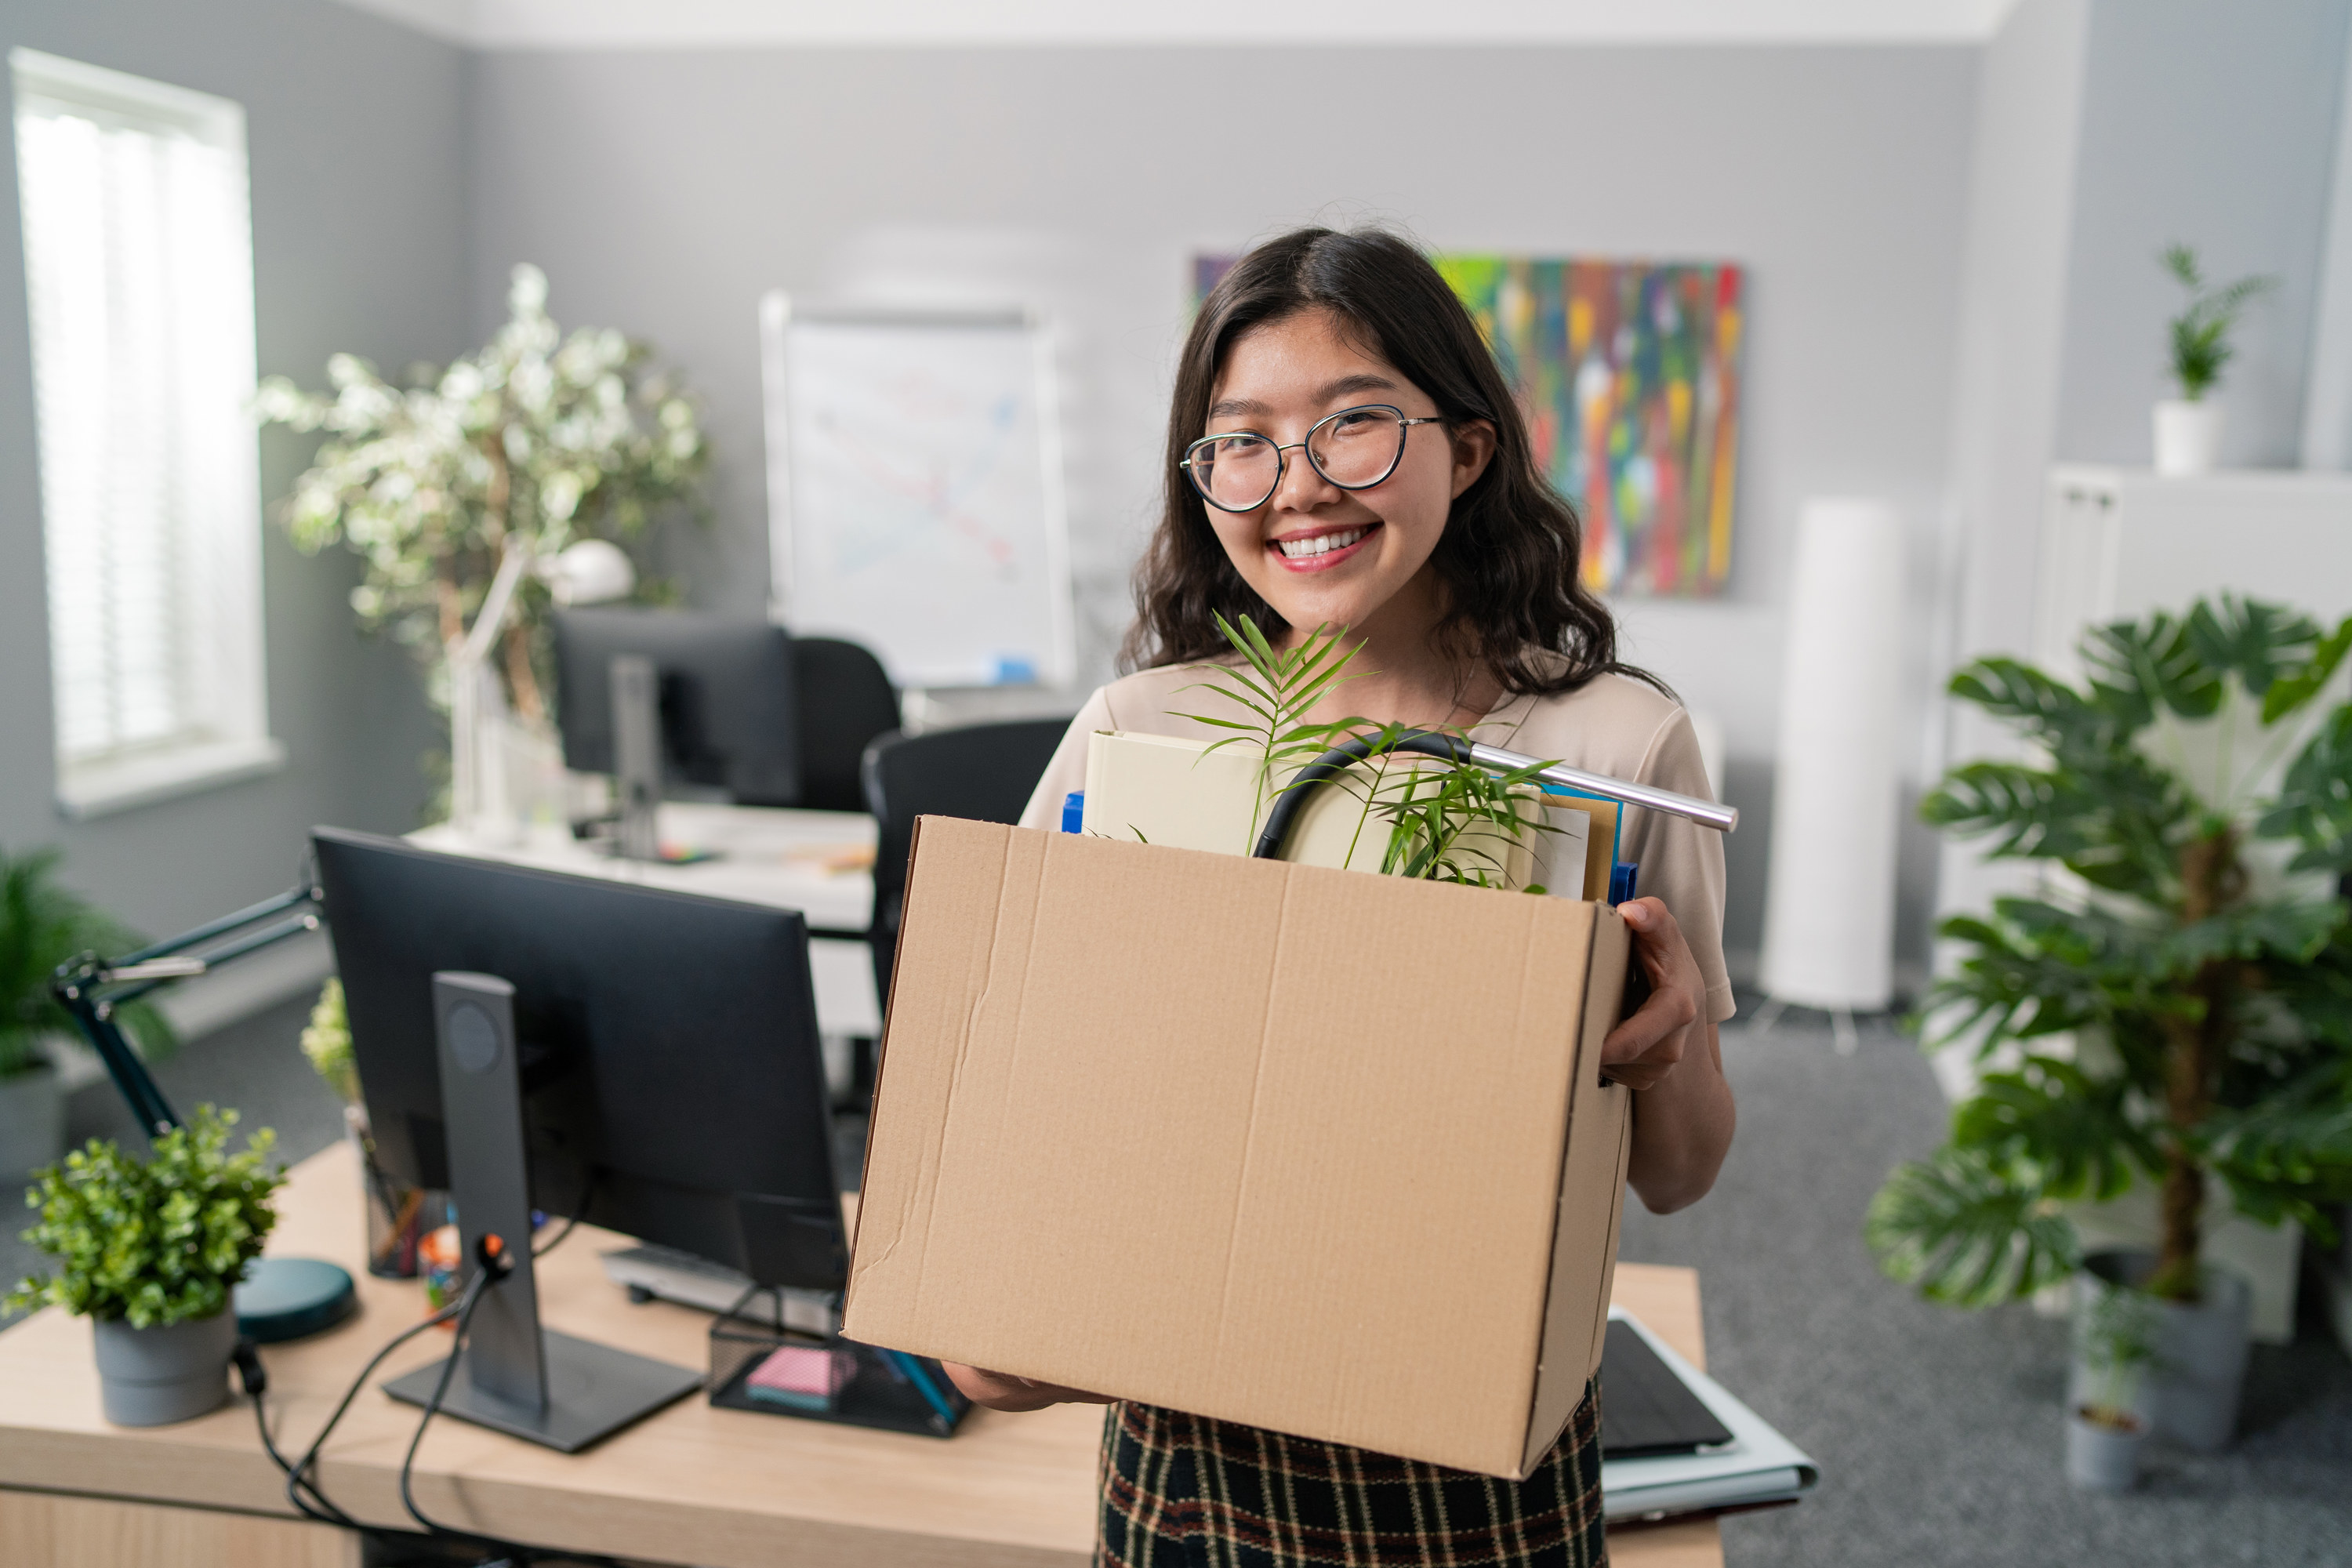 Smiling woman leaving her office with a box of her things